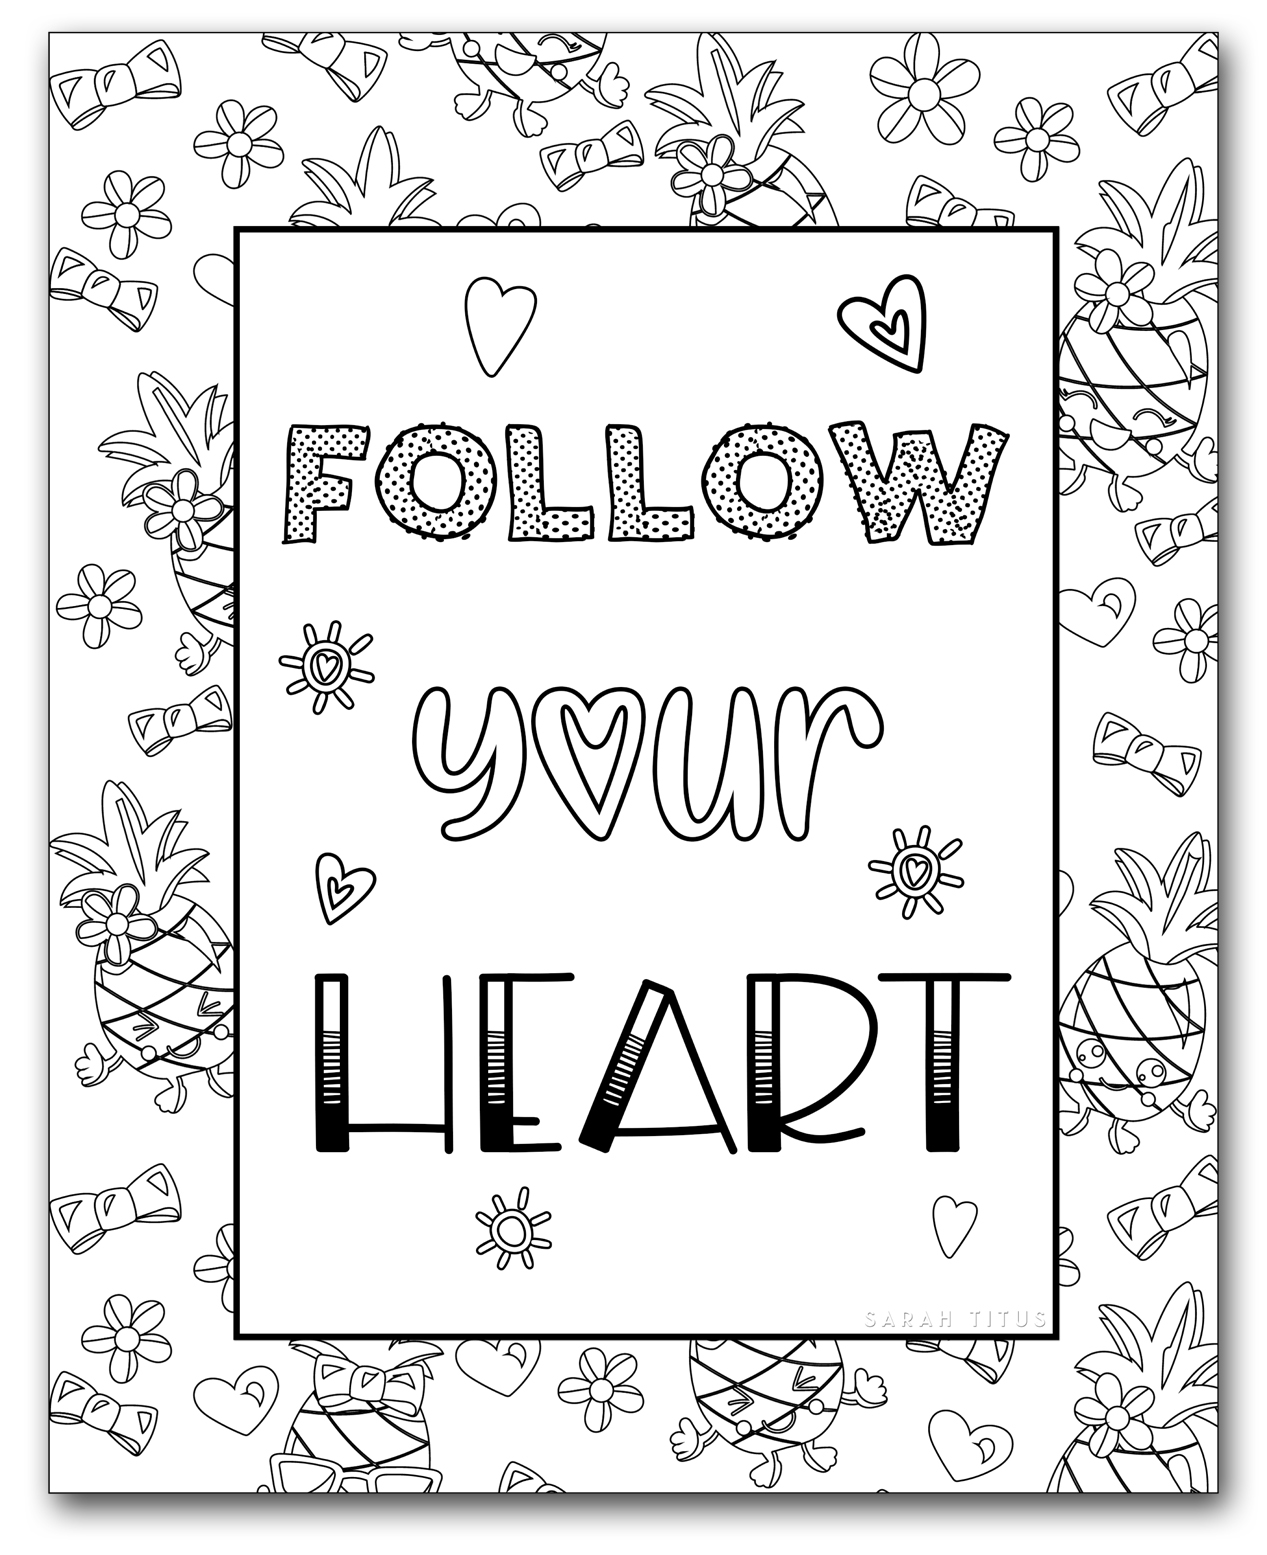 https://www.sarahtitus.com/wp-content/uploads/2018/08/Printable-Coloring-Pages-for-Girls.jpg